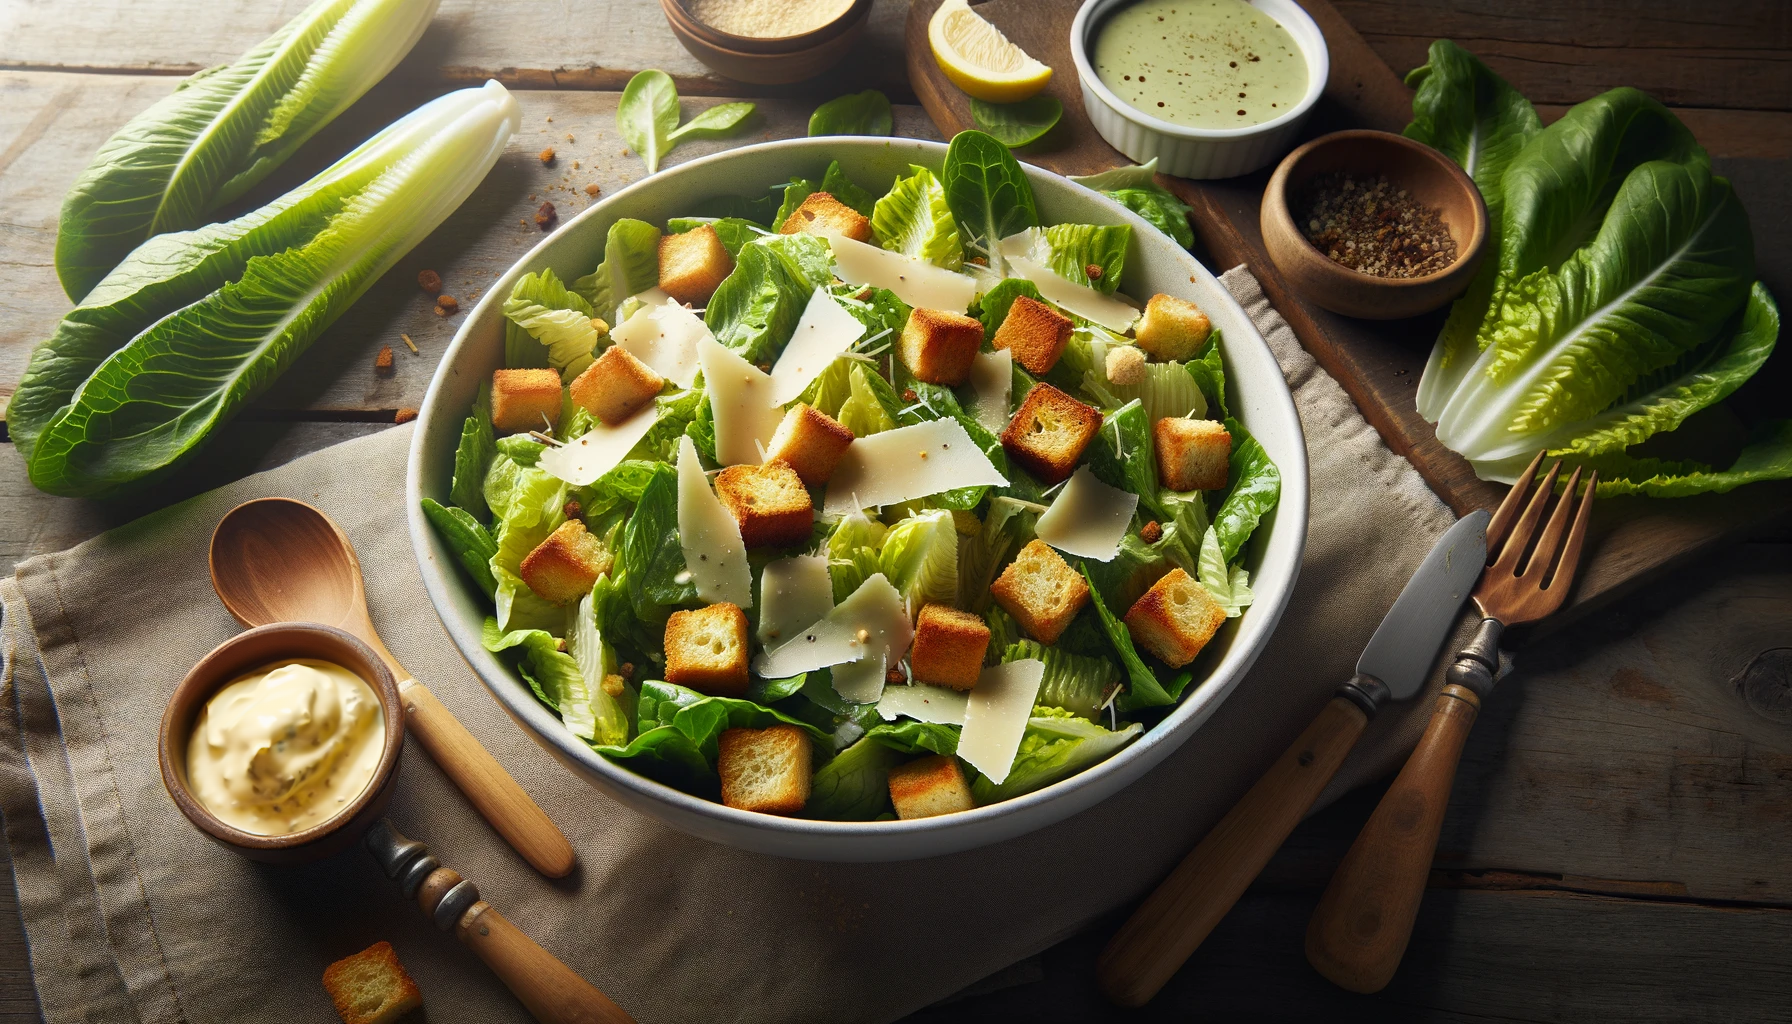 A classic Caesar salad with crisp romaine lettuce, creamy dressing, crunchy croutons and plenty of parmesan cheese.